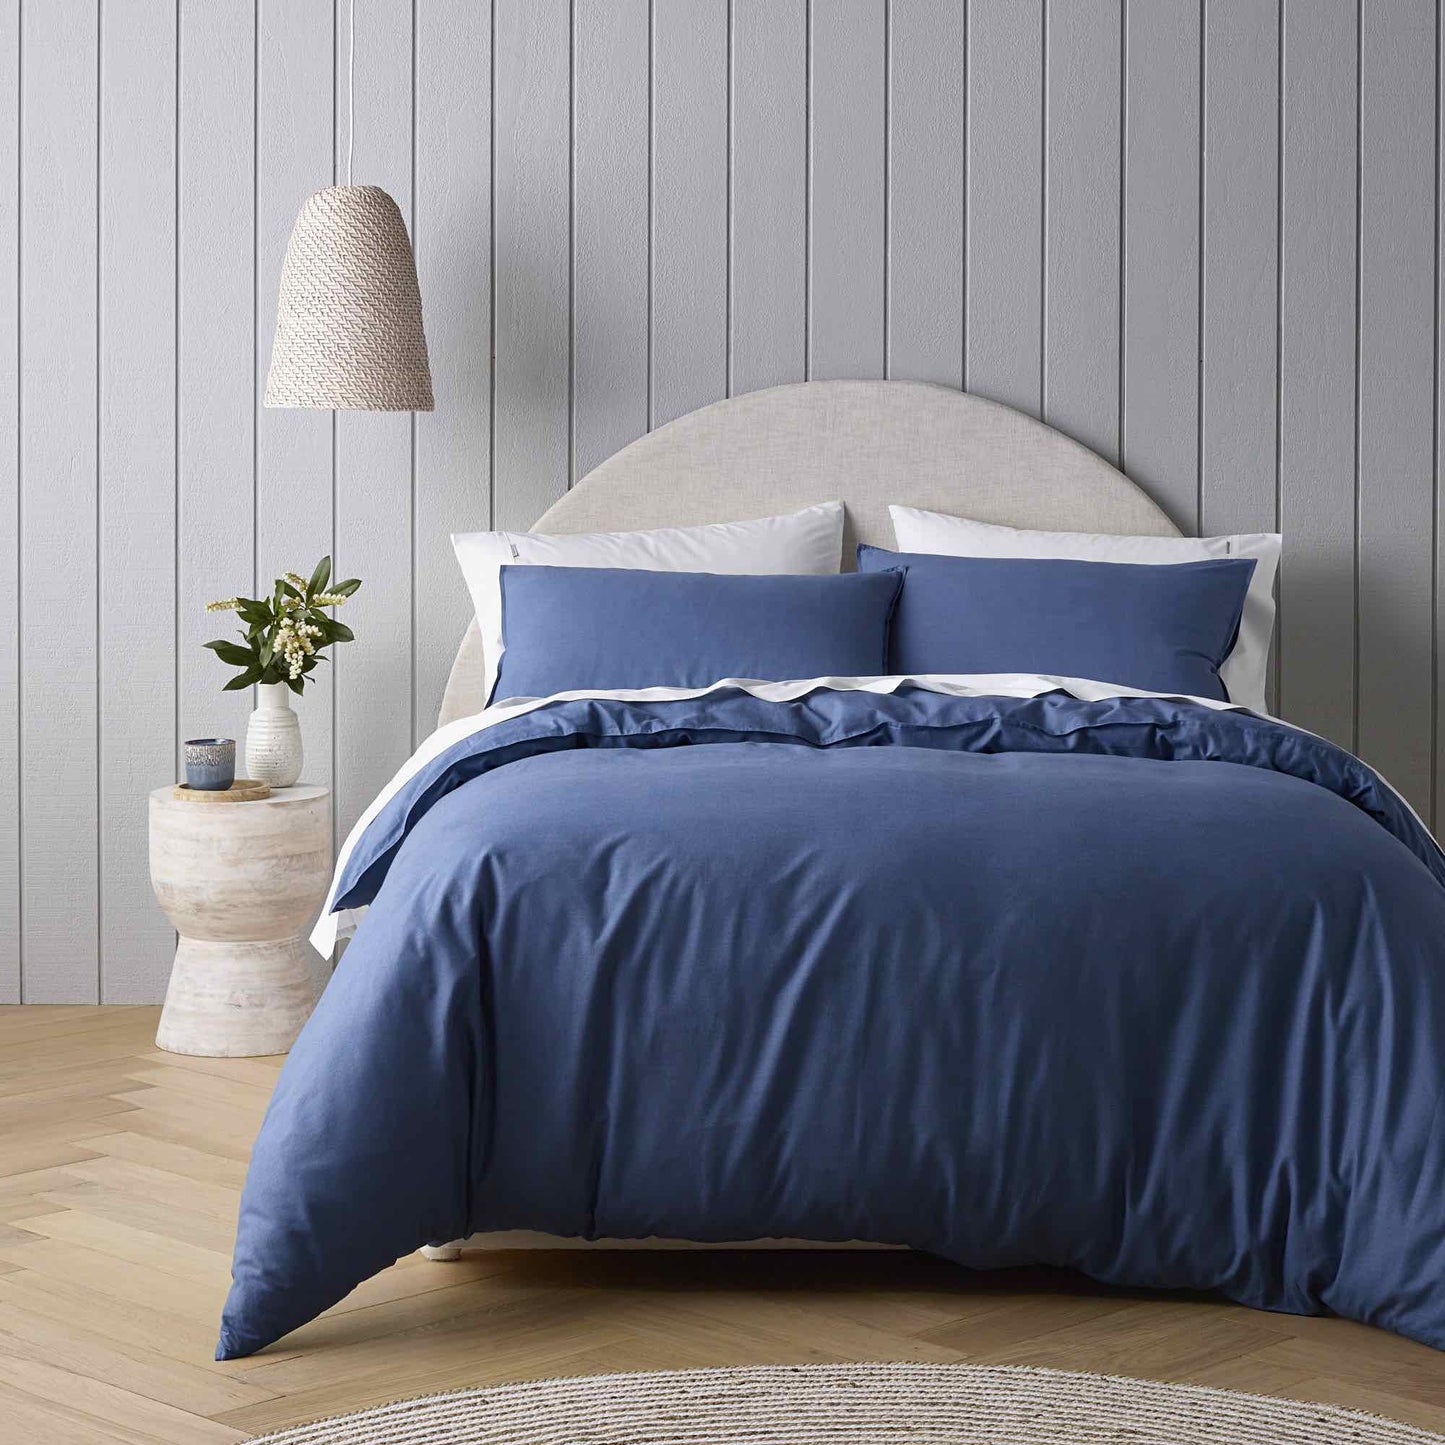 Riviera Organic Washed Cotton Quilt Cover Set Range Blue by Bianca